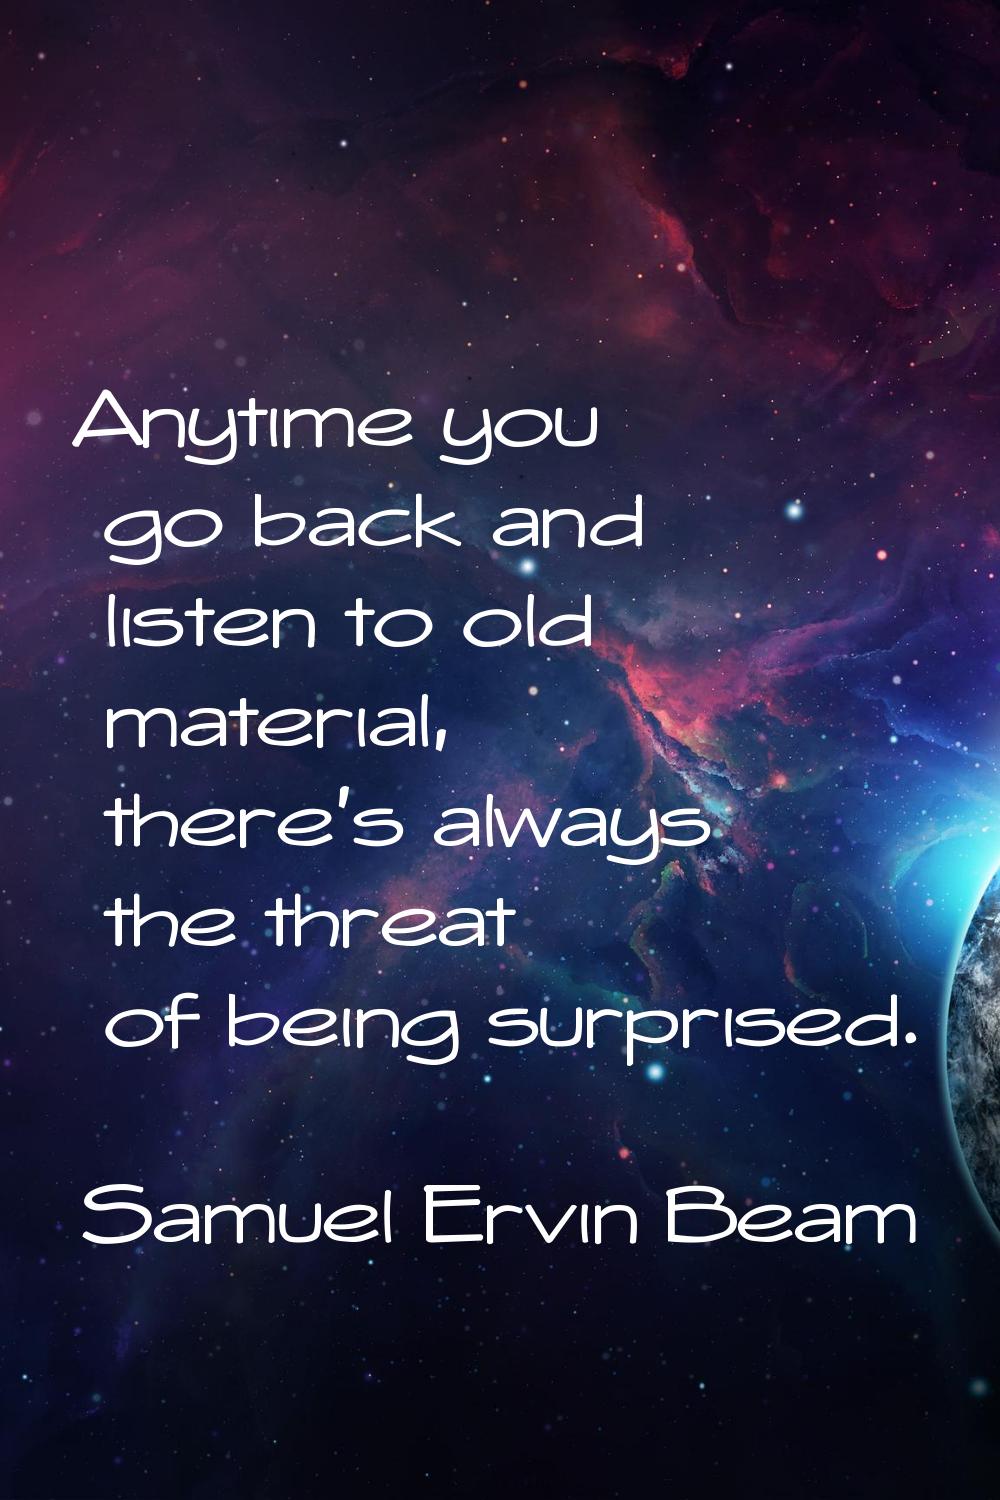 Anytime you go back and listen to old material, there's always the threat of being surprised.